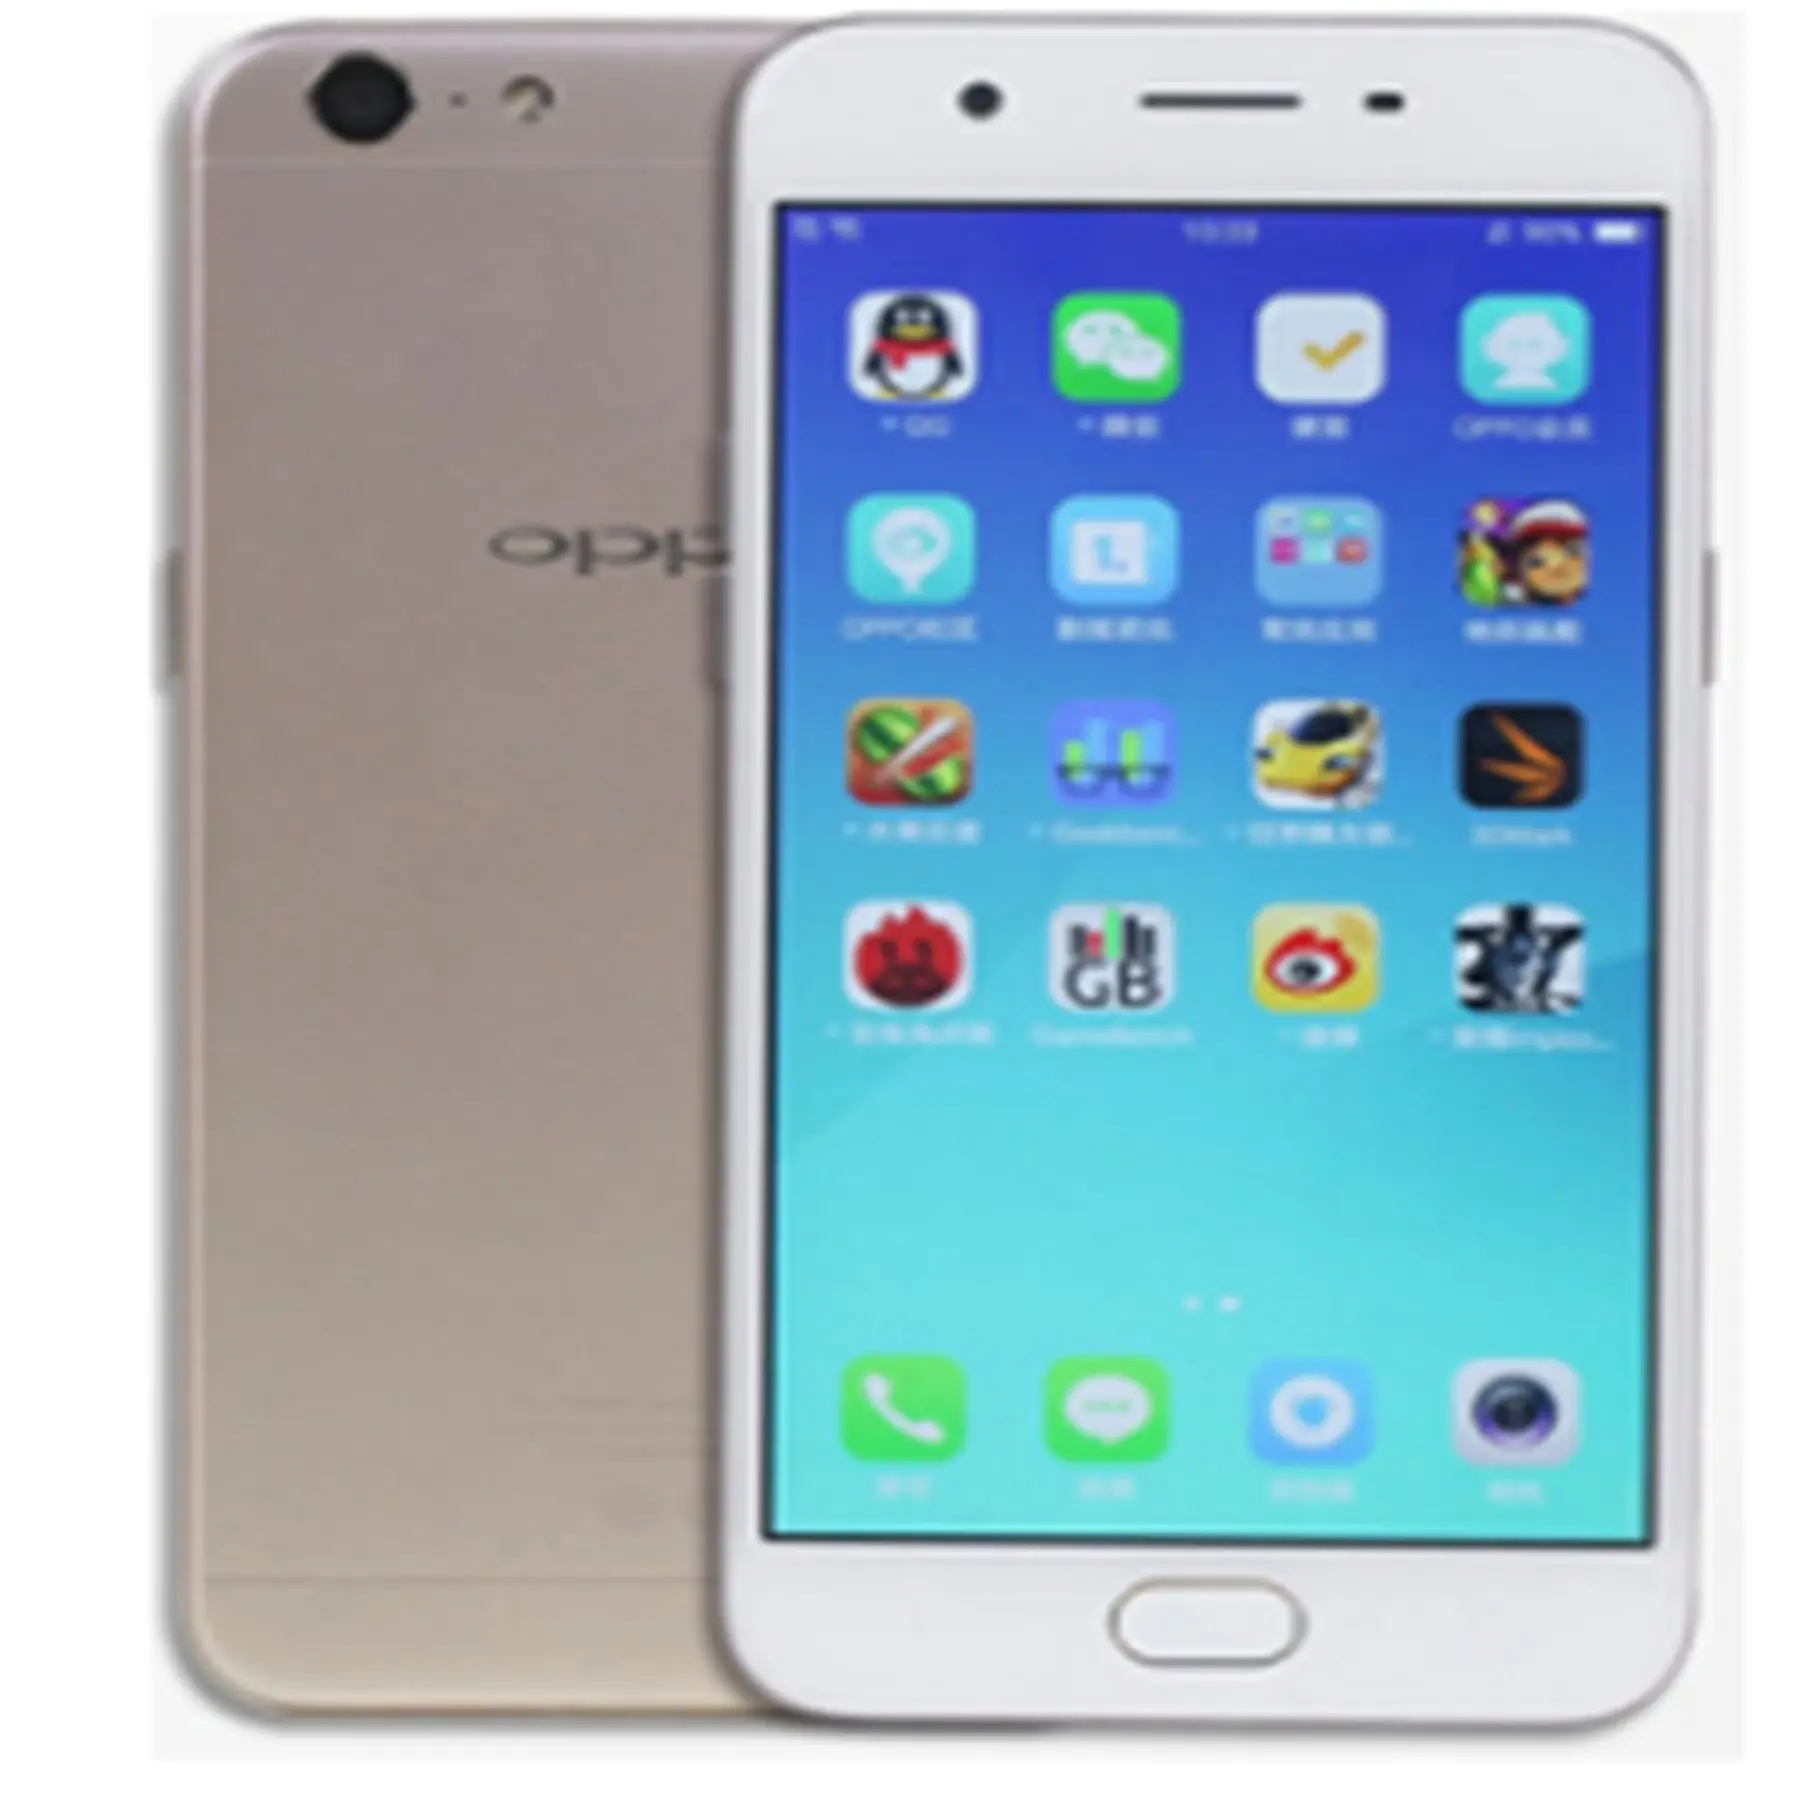 OEM Promotional Price Second hand mobile phone for Oppo A33 16GB 2GB RAM 5.0 inches Smart phone